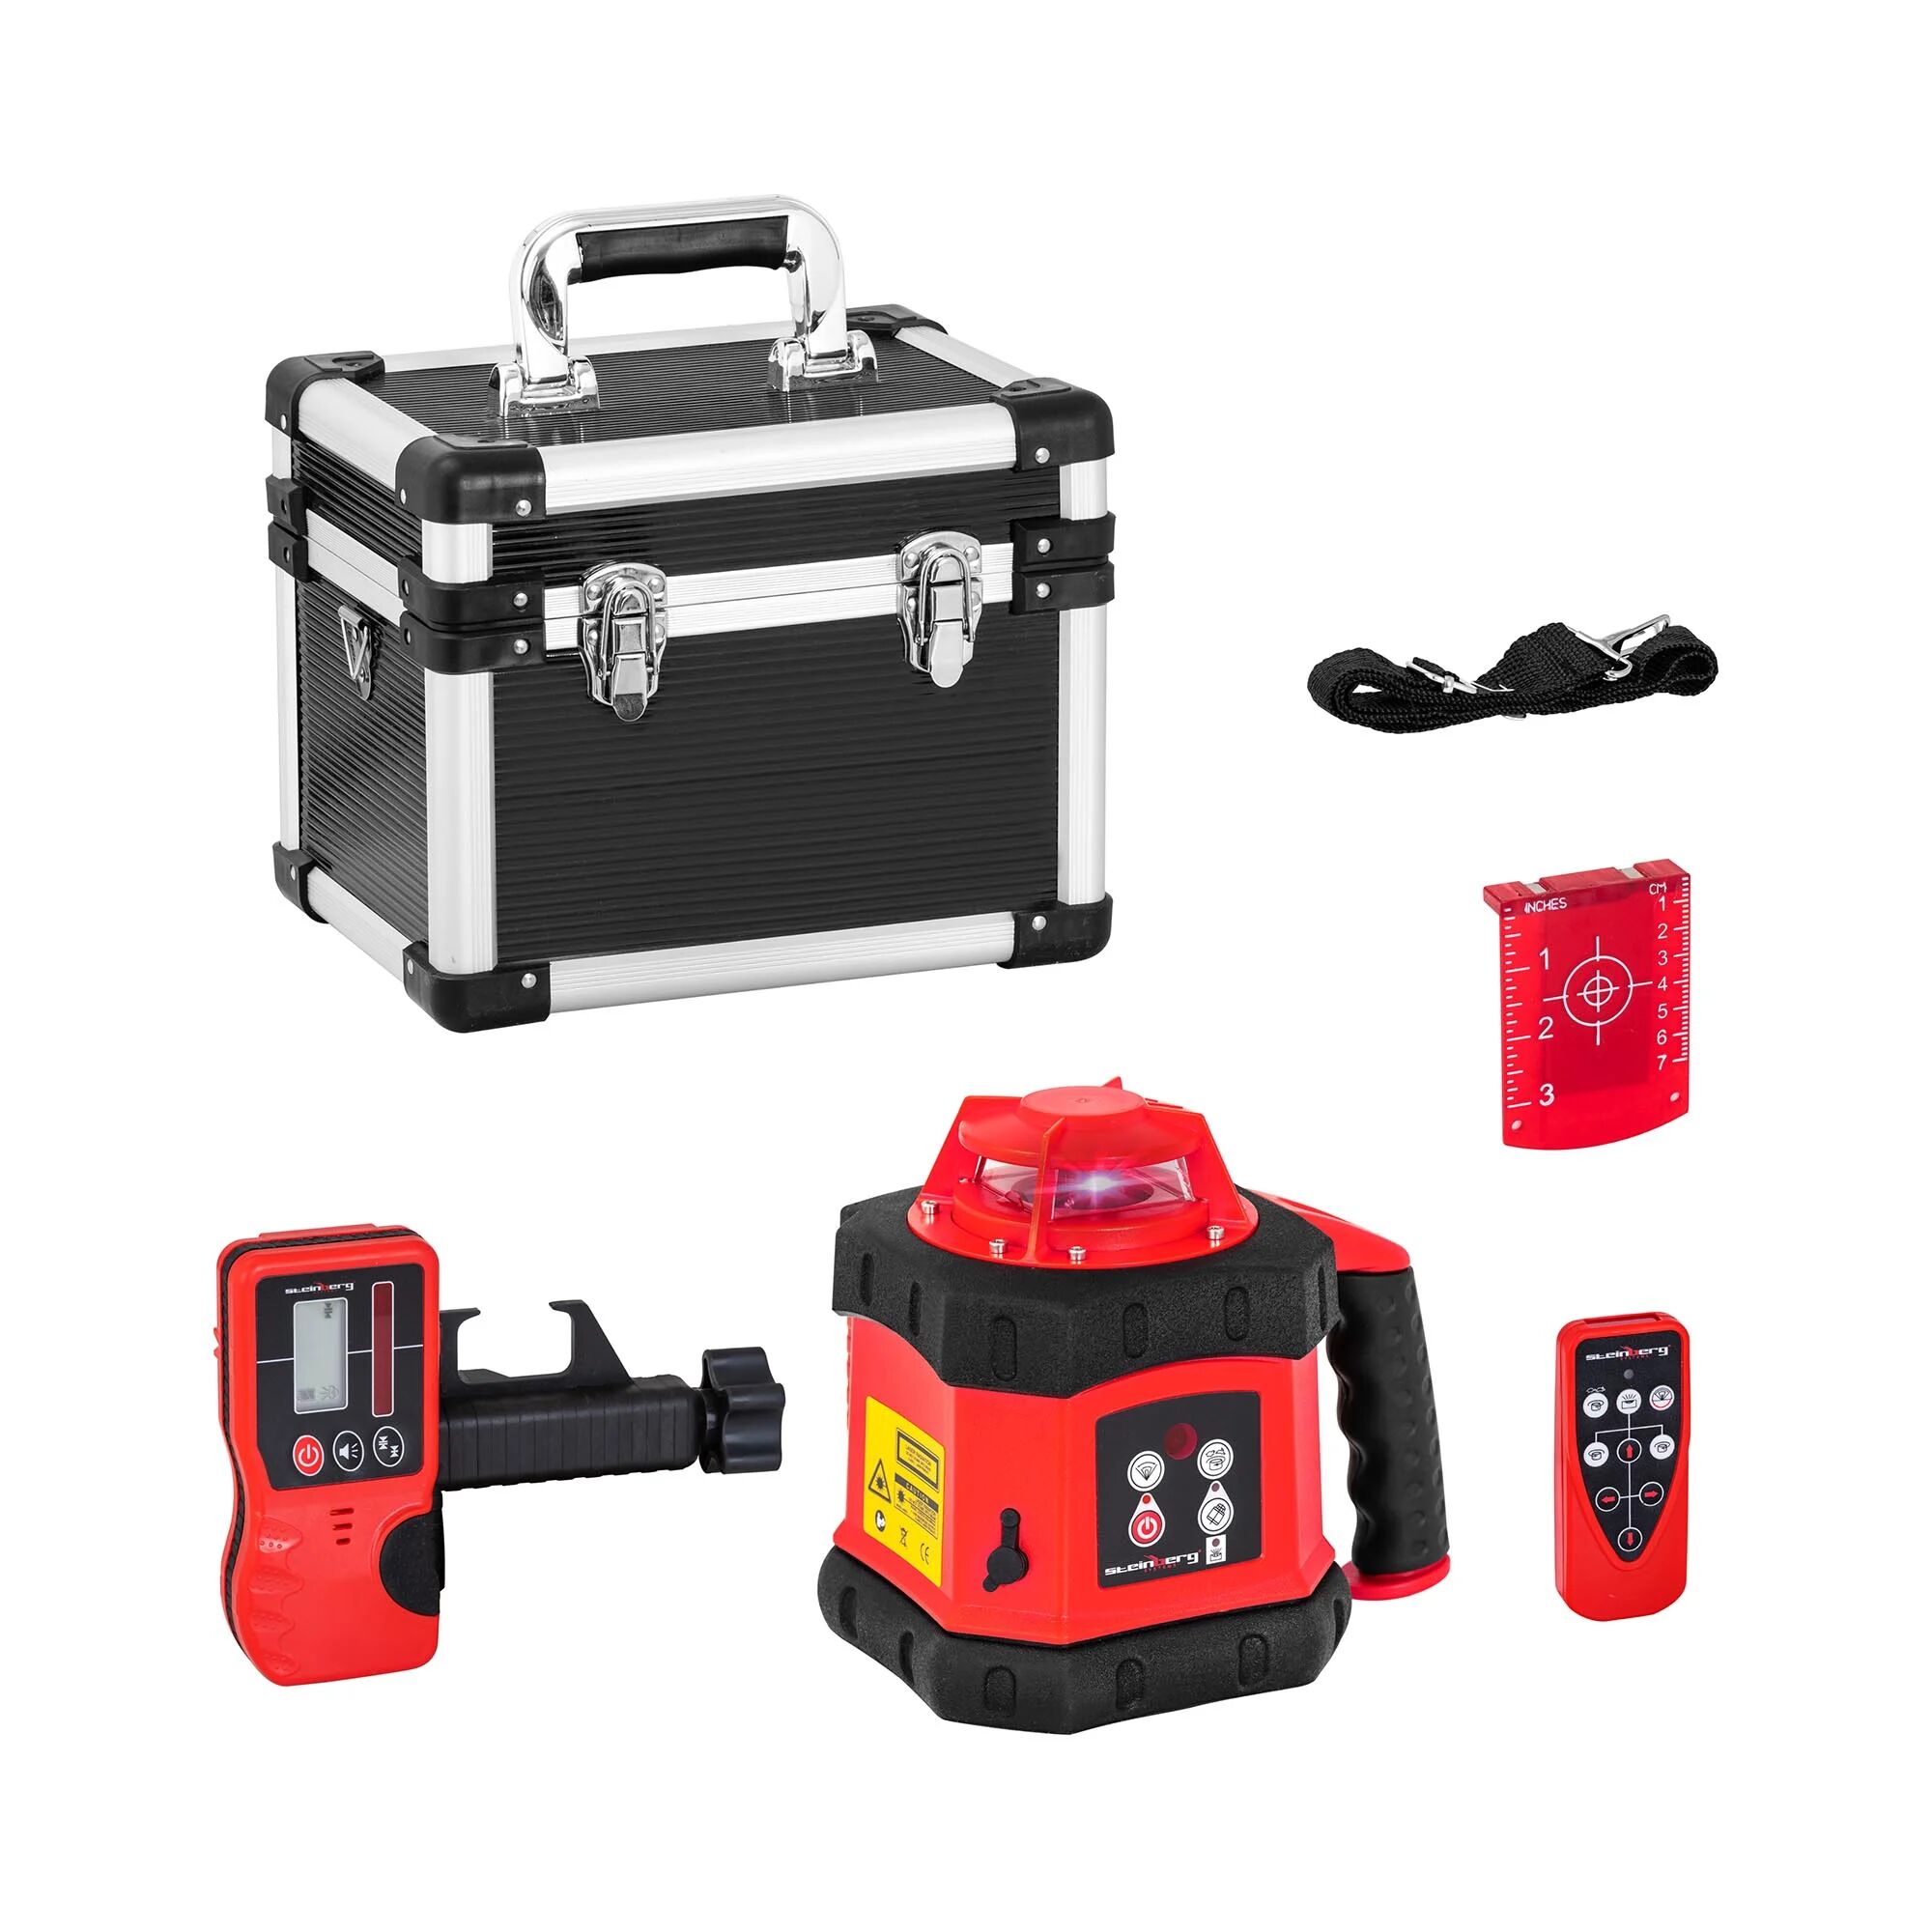 Steinberg Rotary Laser Level - red - Ø 300 m - self-levelling